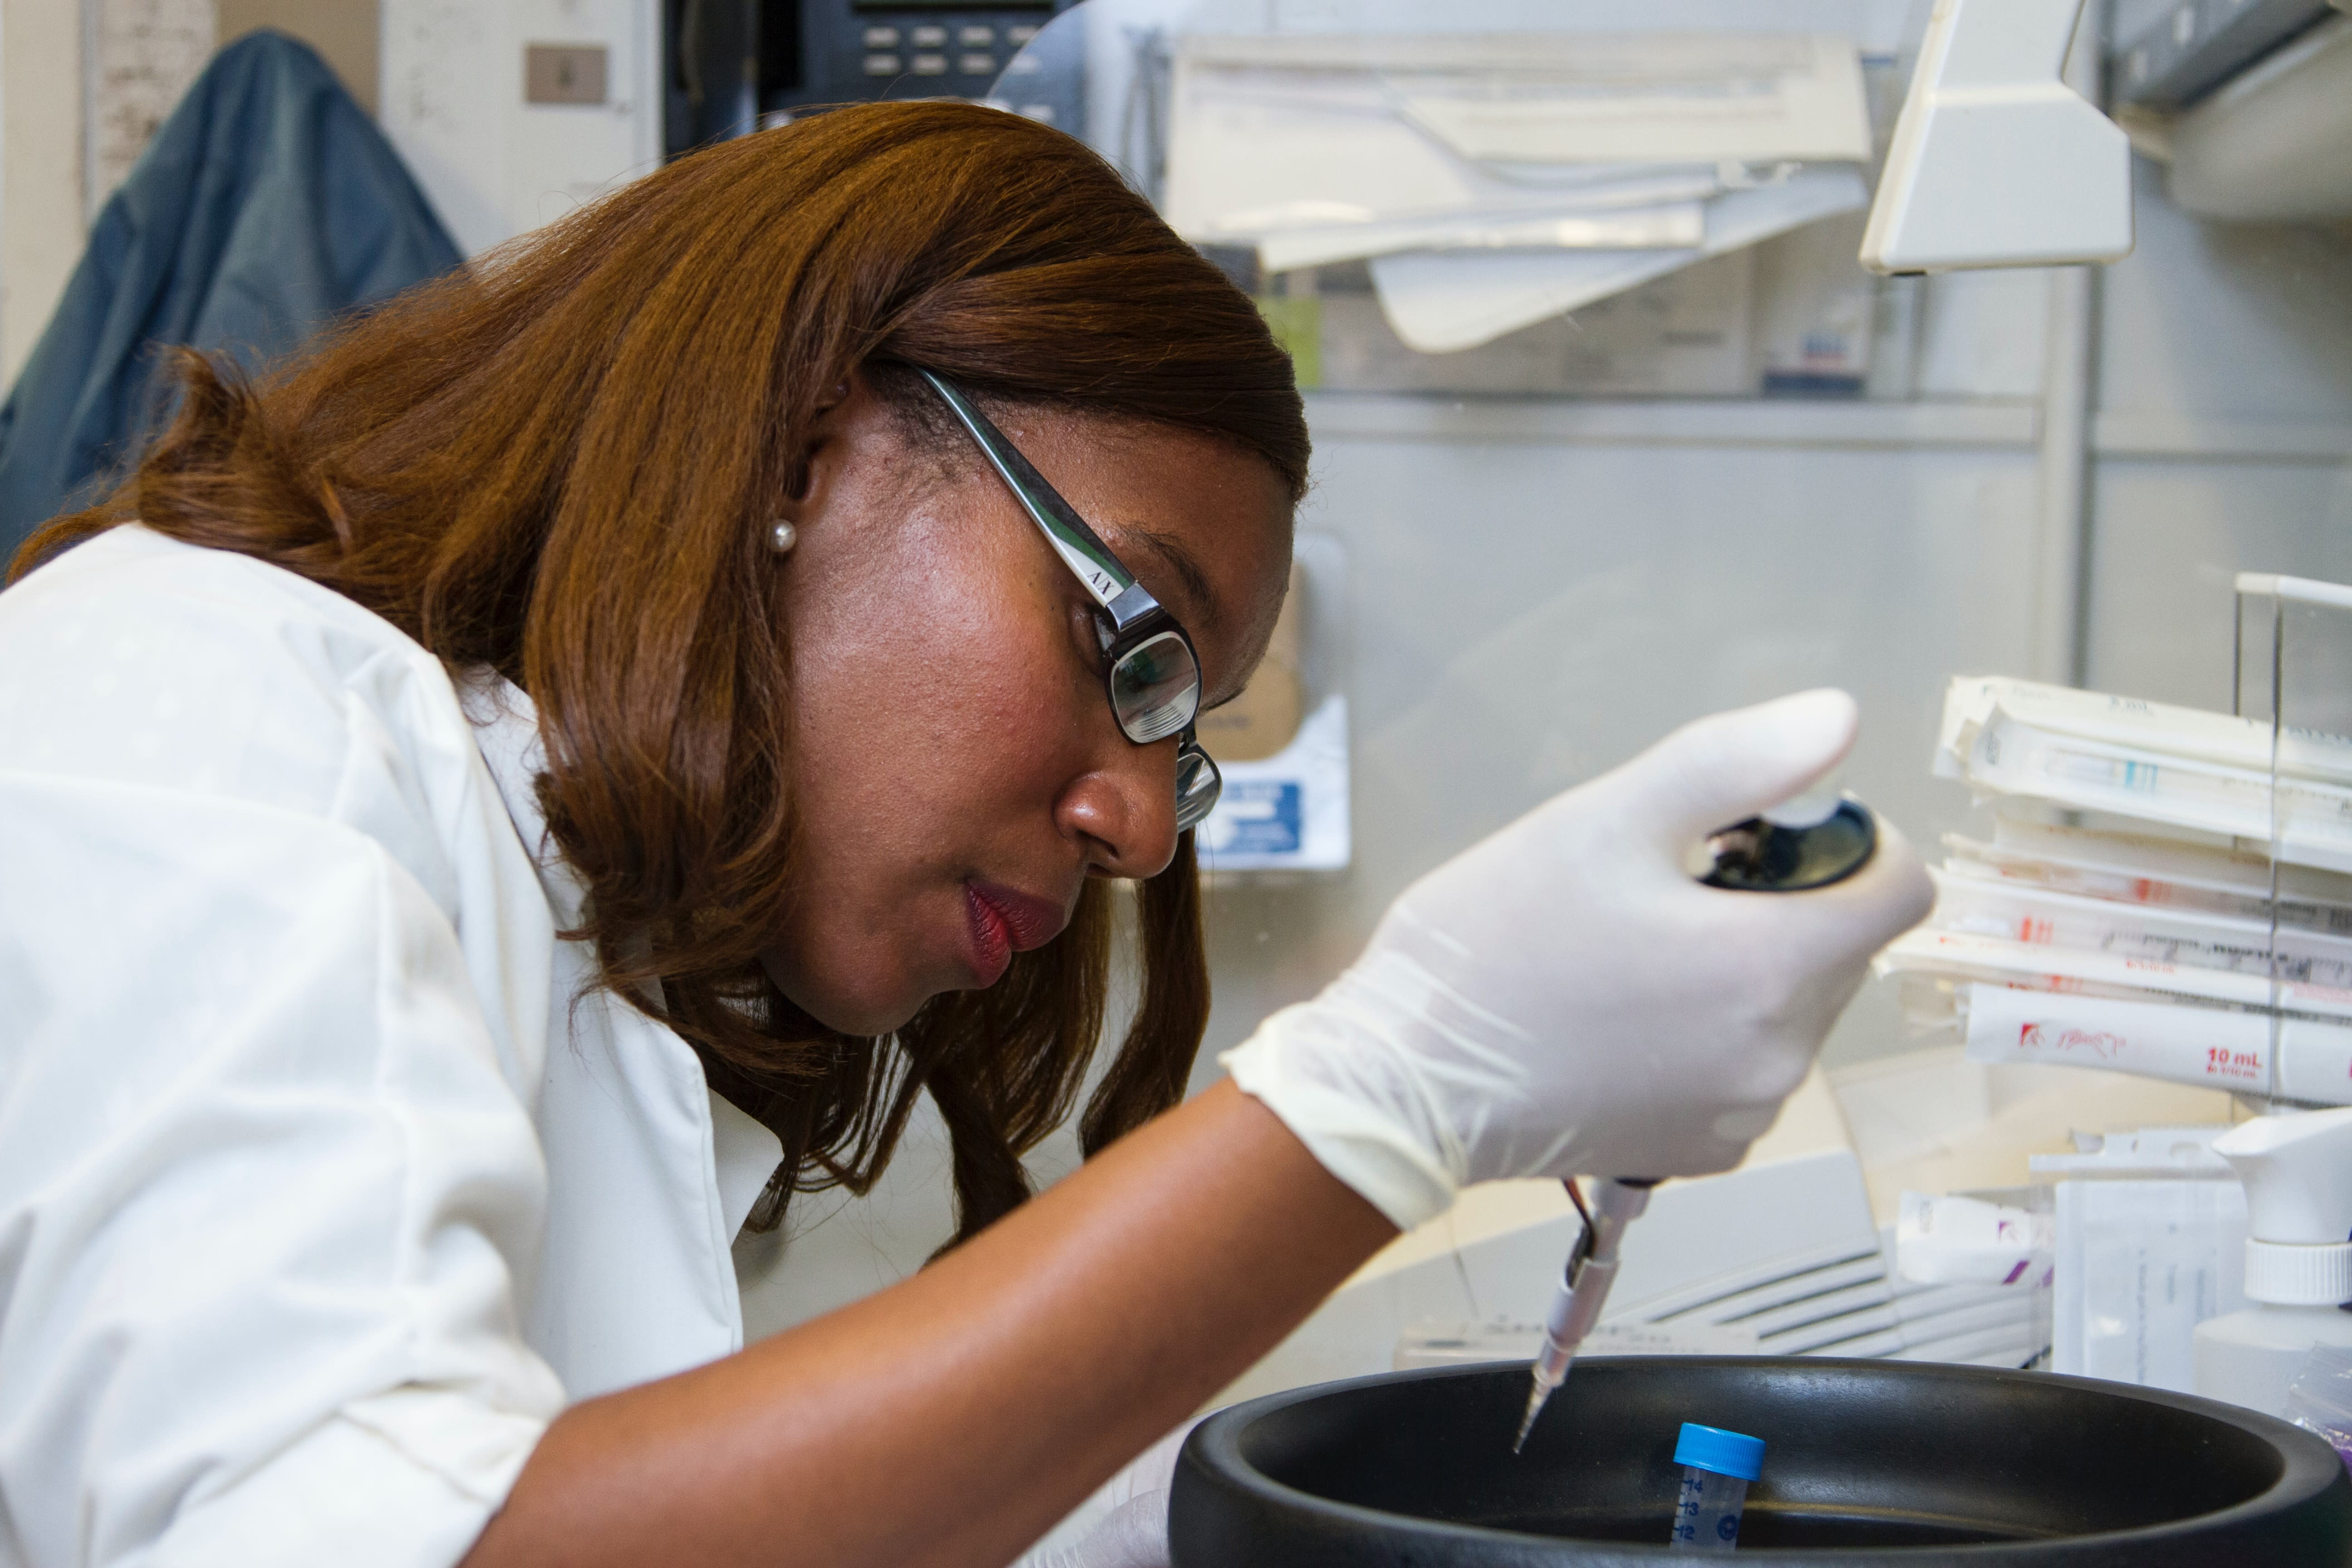 Chanelle Case Borden, Ph.D., a postdoctoral fellow in the National Cancer Institute's Experimental Immunology Branch, pipetting DNA samples into a tube for polymerase chain reaction, or PCR, a laboratory technique used to make multiple copies of a segment of DNA.